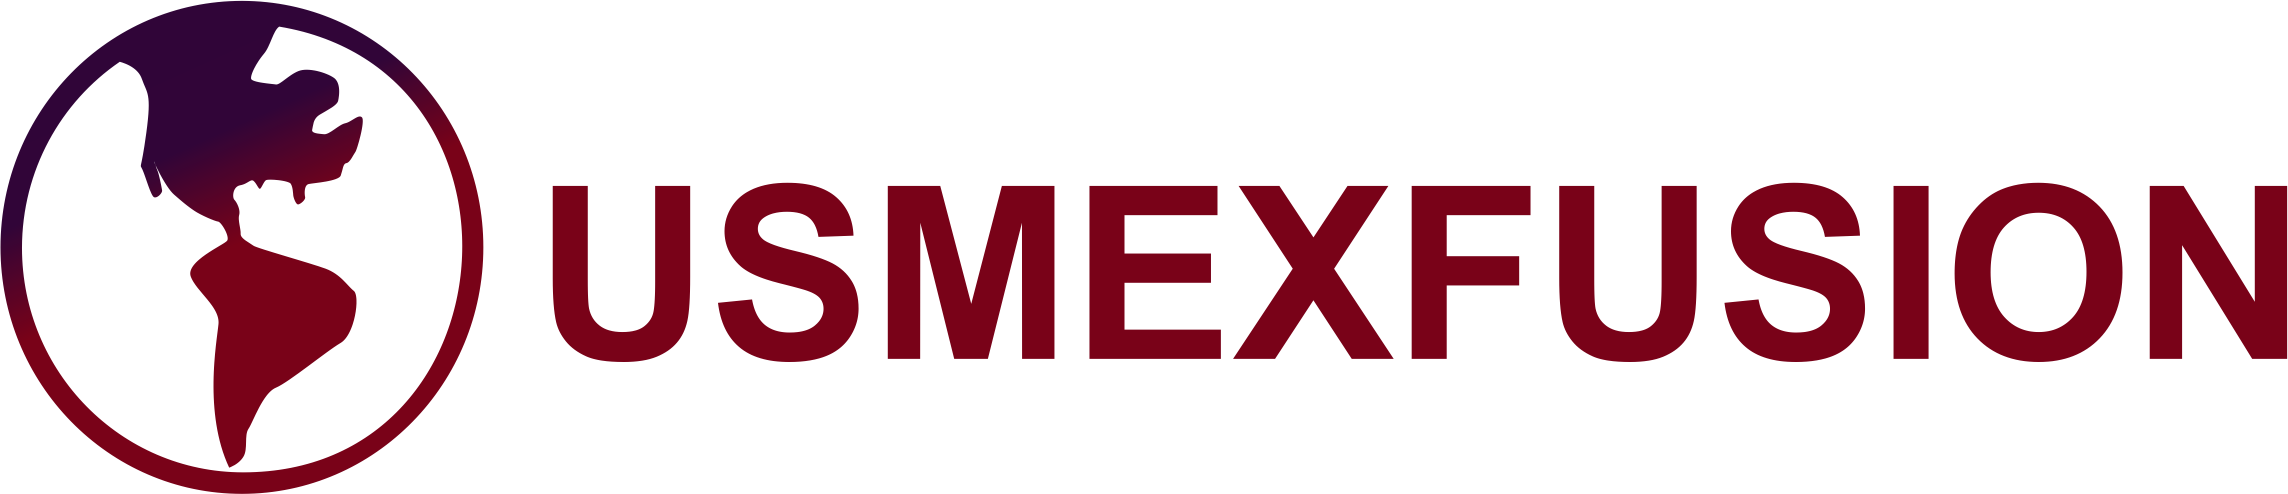 USMEXFUSION, A.C. supports educational institutions to comprehensively internationalize their campuses and develop globally competent personnel and students.